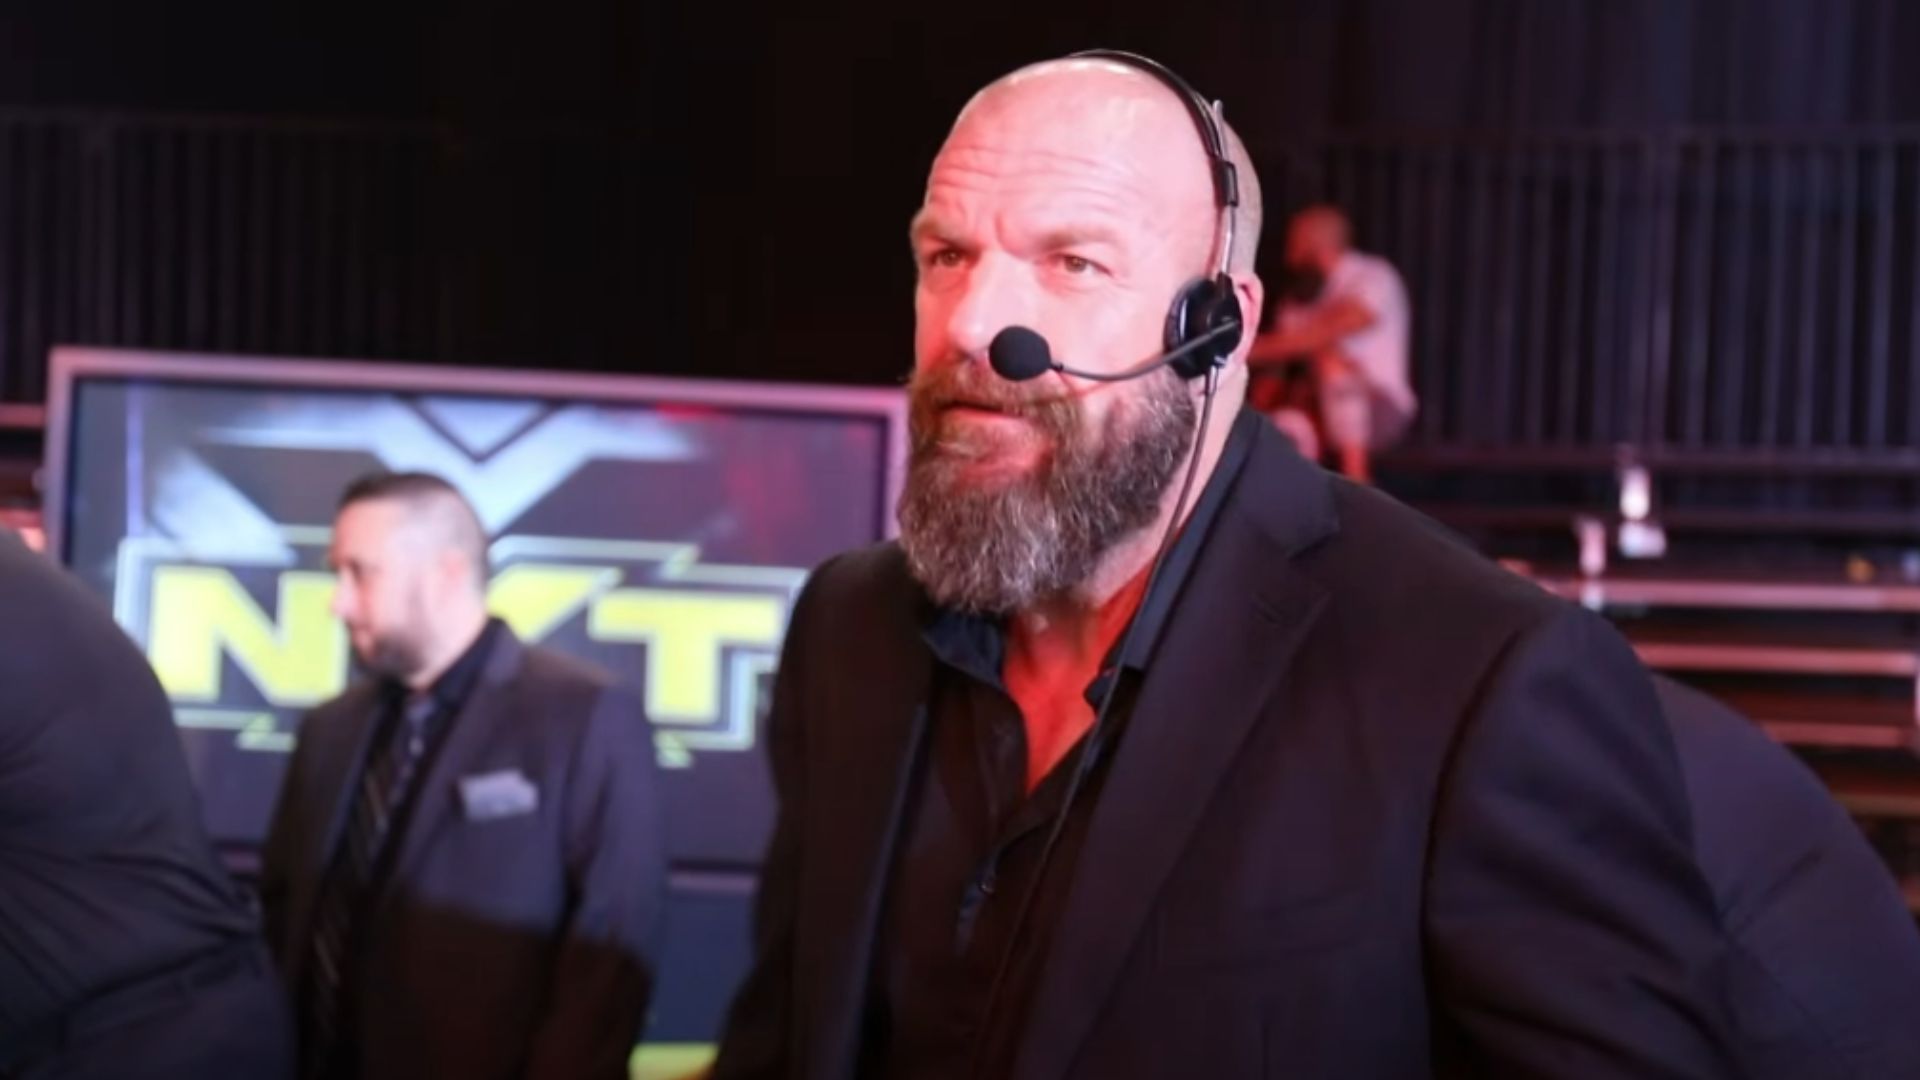 WWE NXT founder Paul Levesque, better known as Triple H